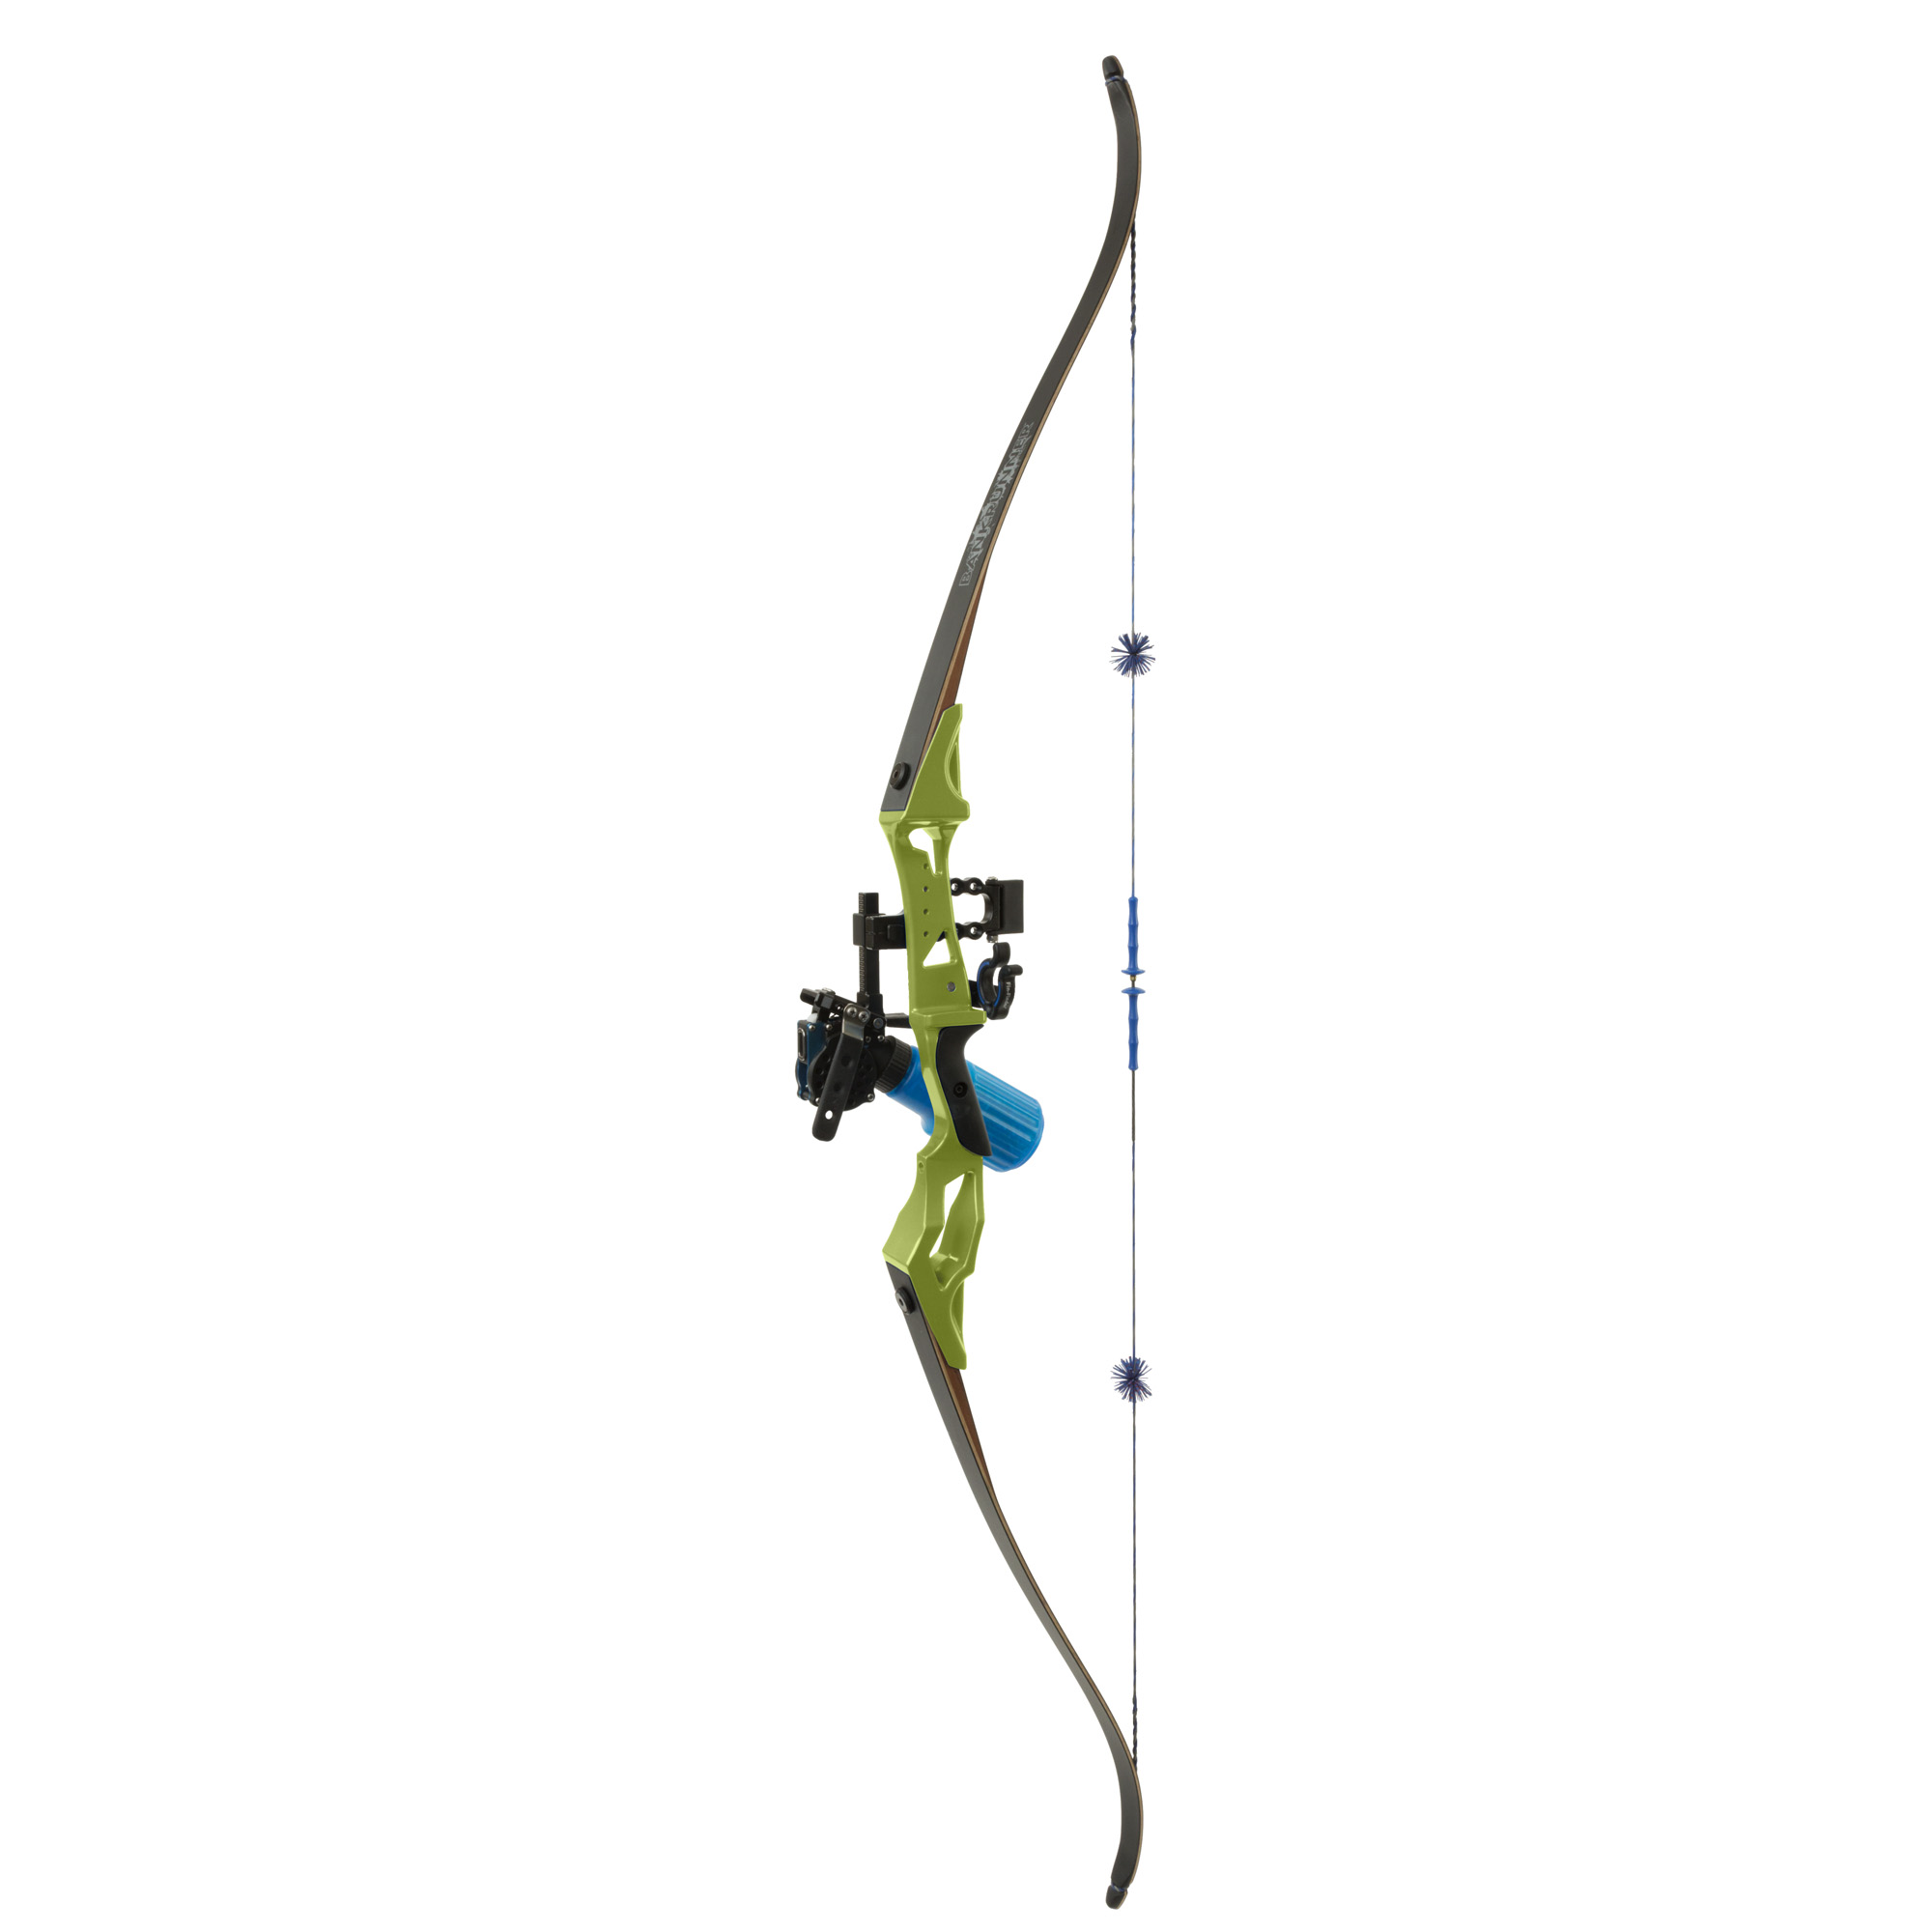 Summit Silver Bow Fishing Reel (Mount not included) - Hi-Tech Archery